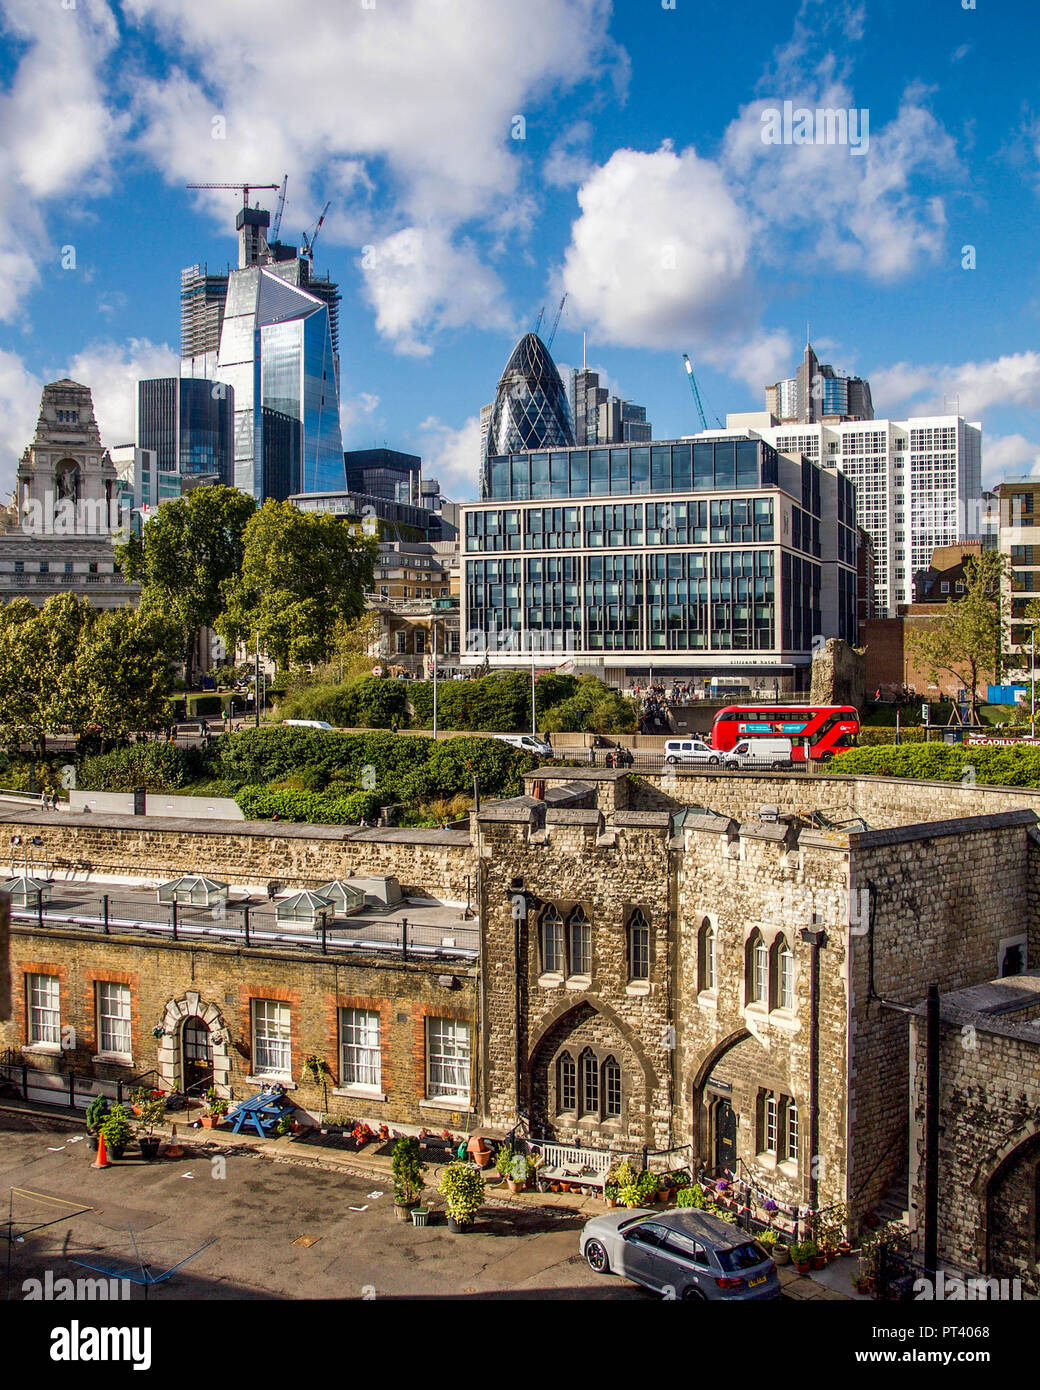 London Skyline on Tower Hill from Medieval Castle to Modern Skyscrapers Stock Photo